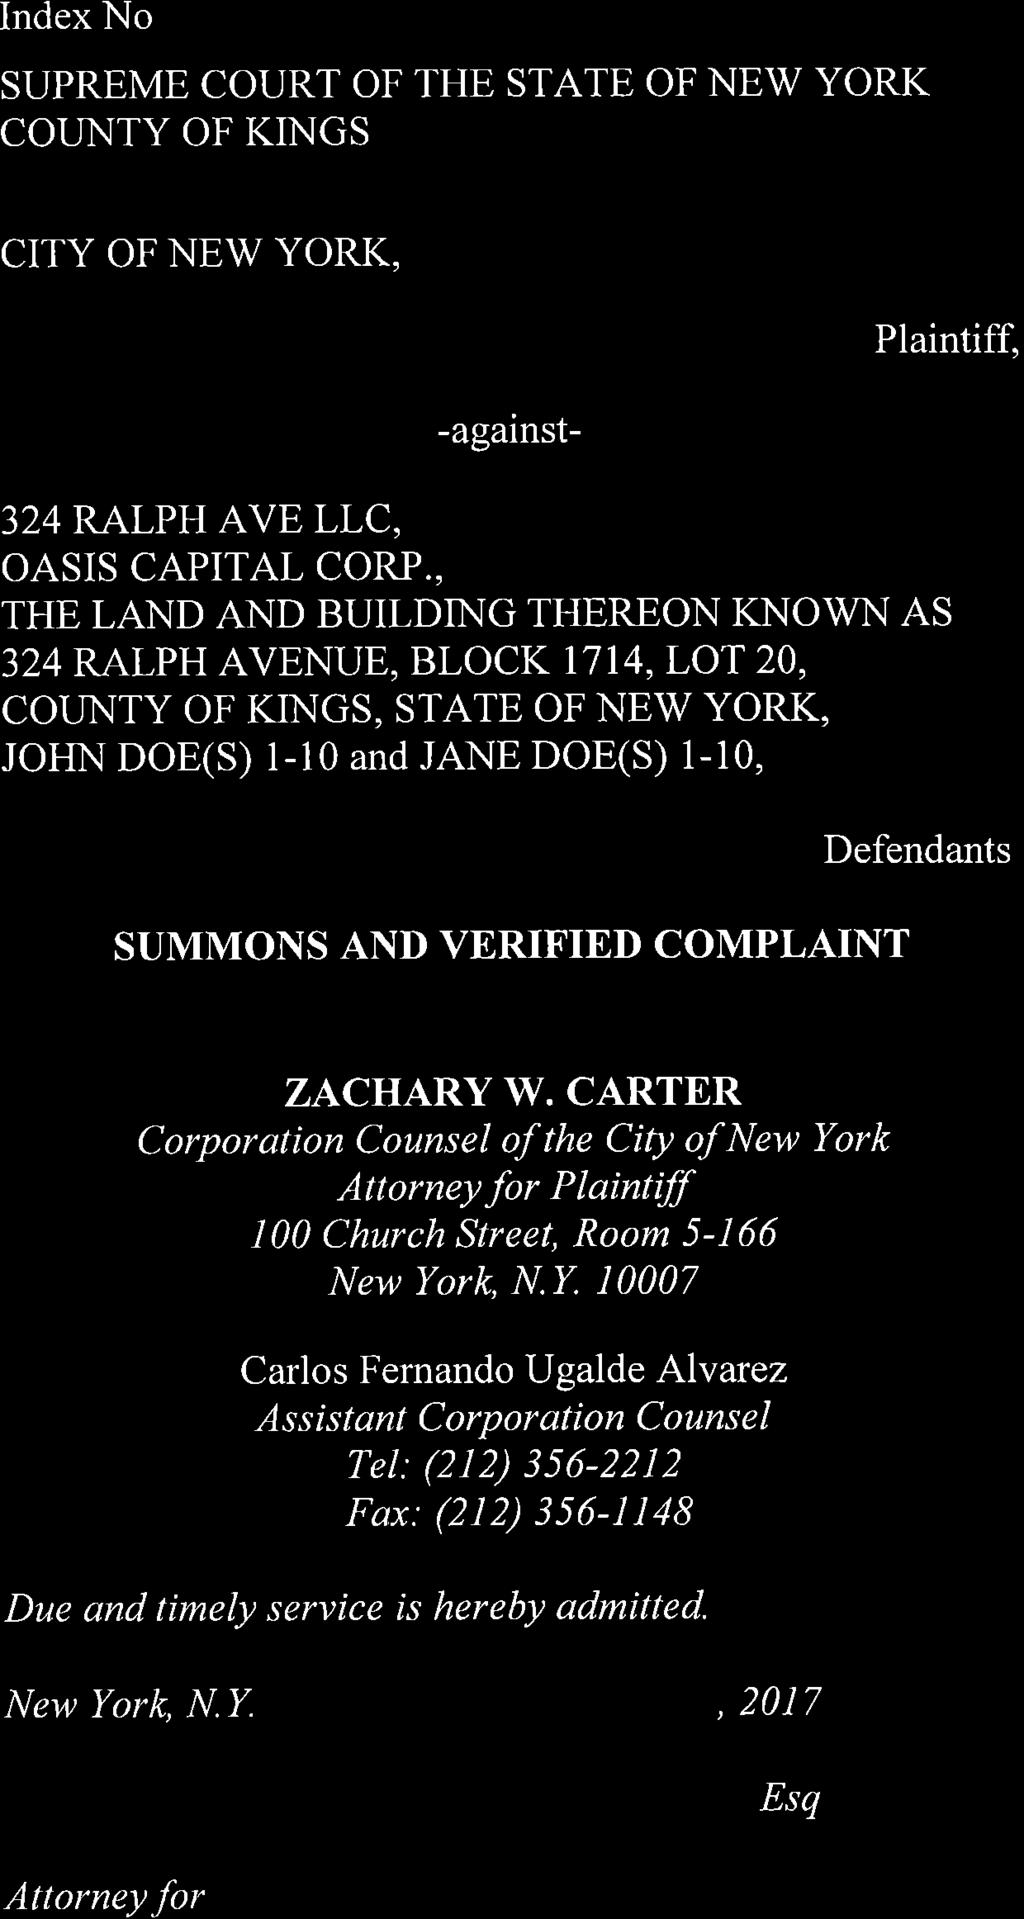 Index No SUPREME COURT OF THE STATE OF NEW YORK COLINTY OF KINGS CITY OF NEW YORK, -against- Plaintiff, 324 RALPH AVE LLC, OASIS CAPITAL CORP.